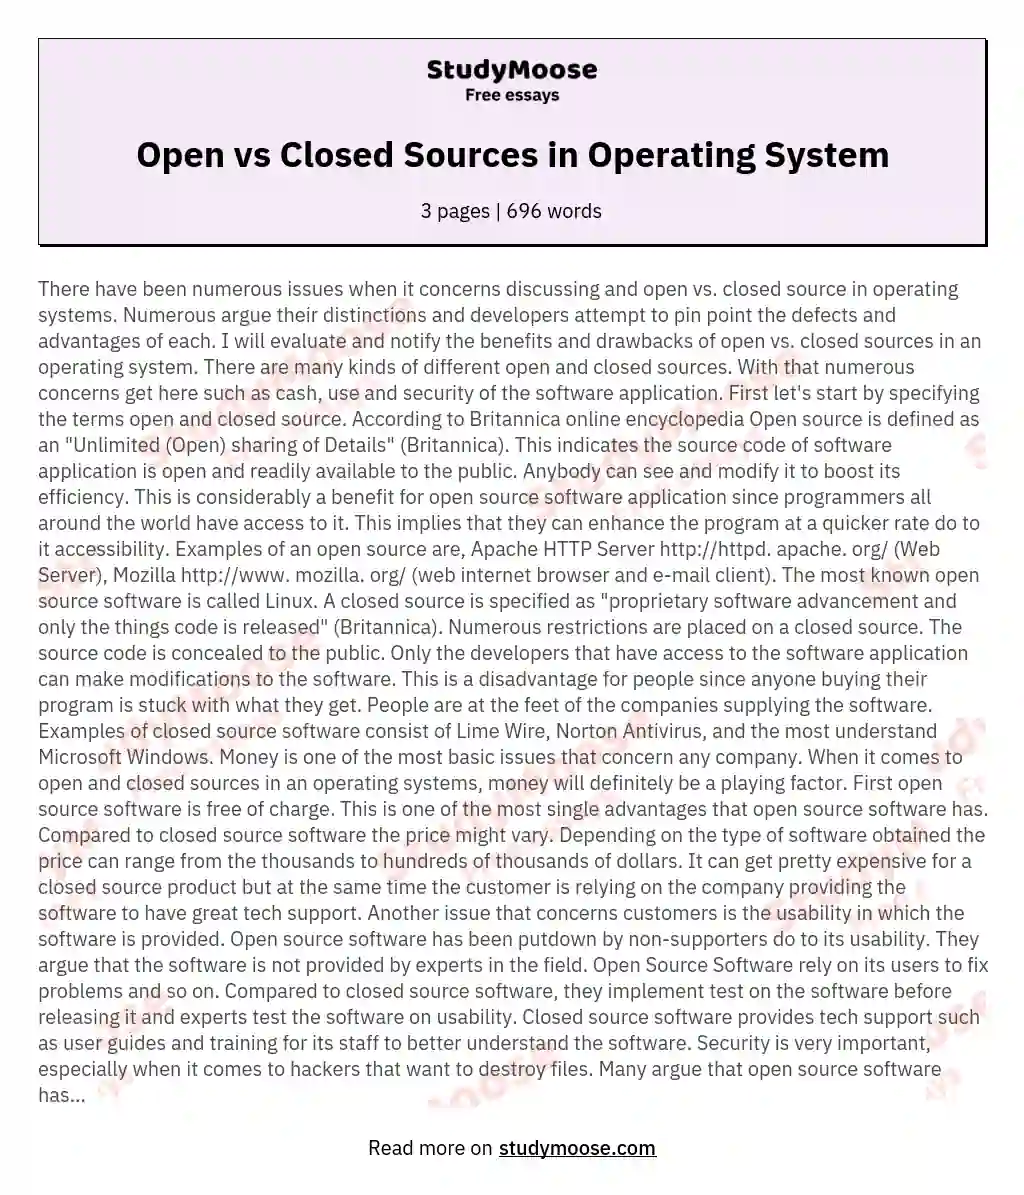 Open vs Closed Sources in Operating System